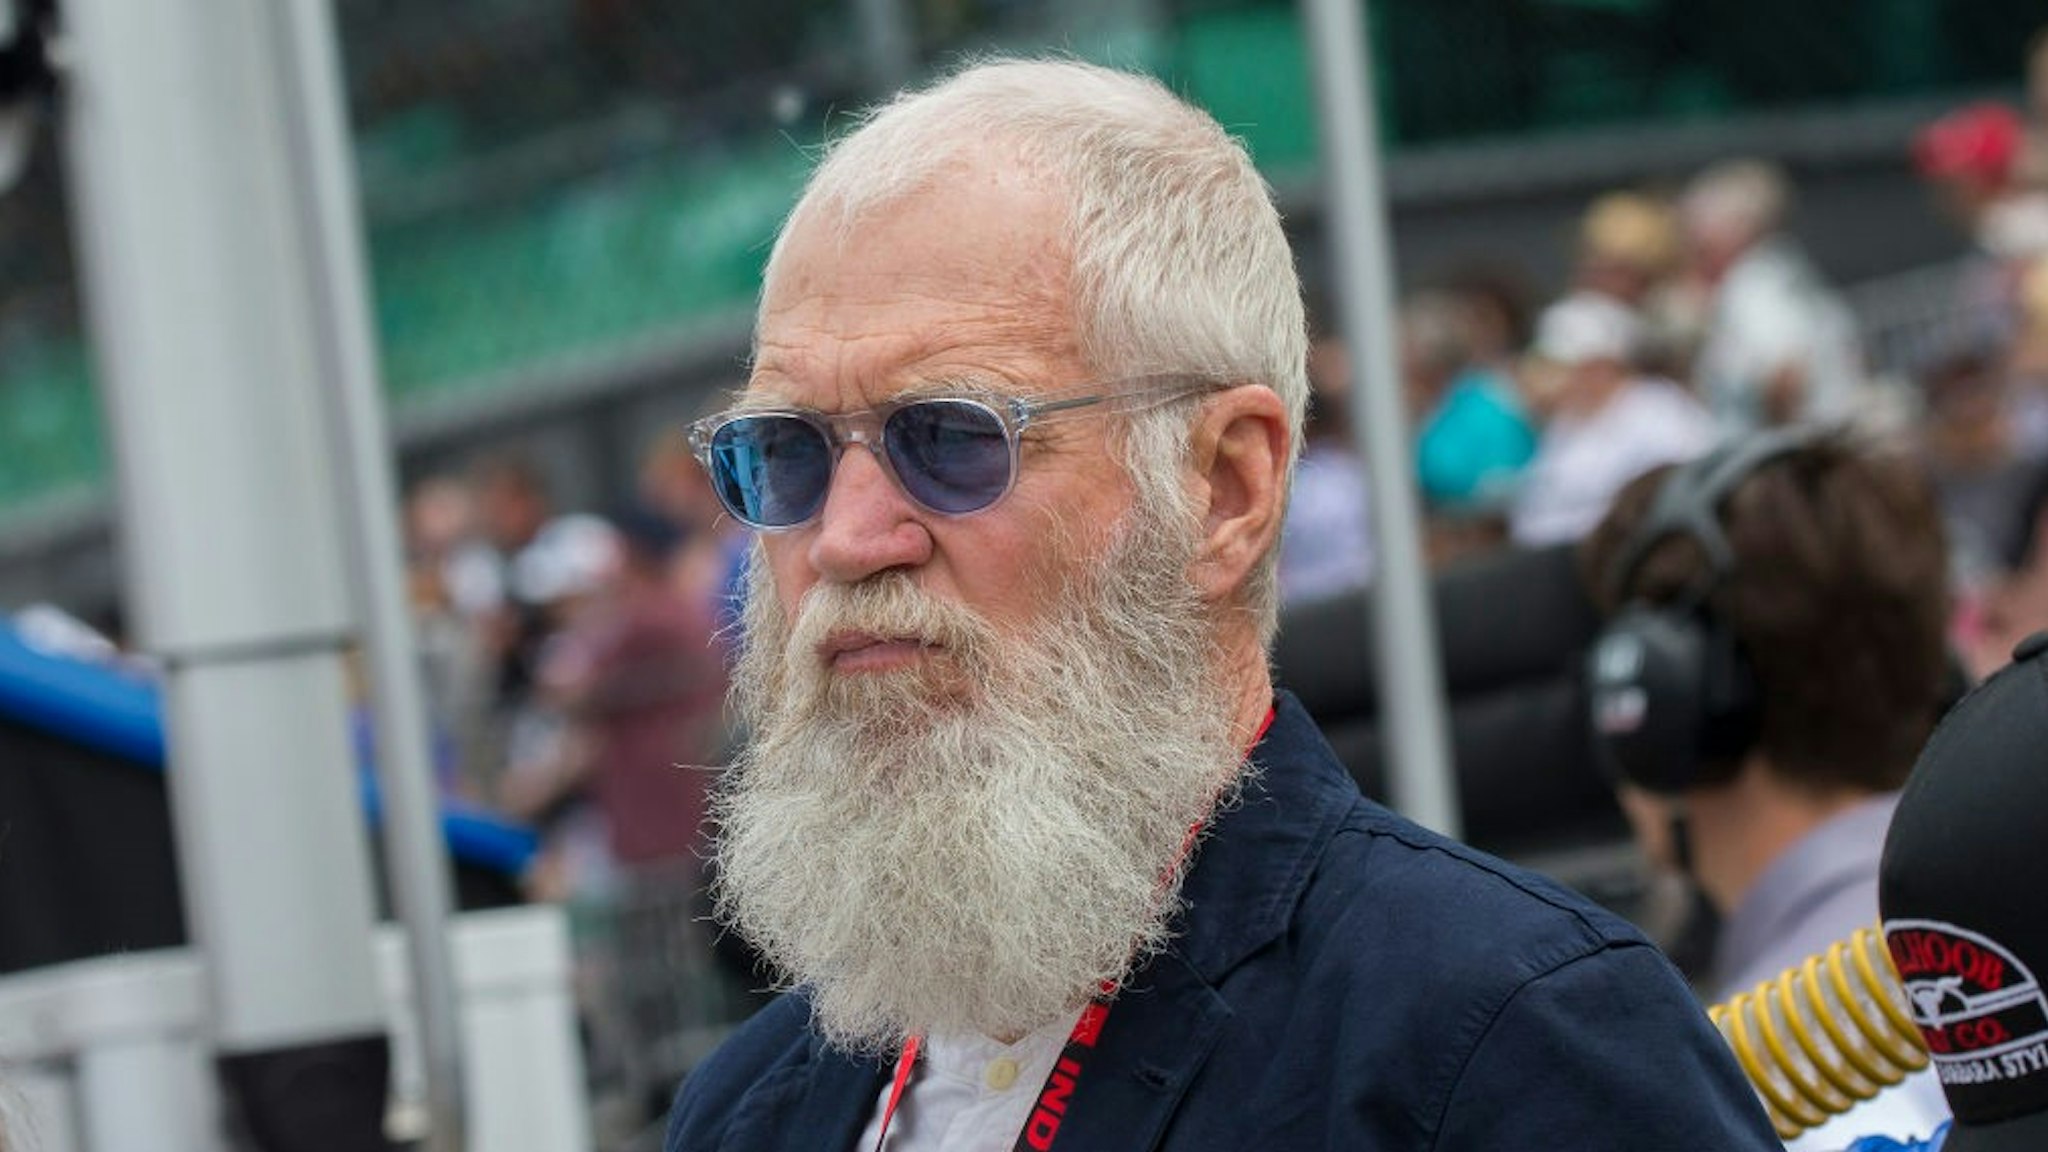 INDIANAPOLIS, IN - MAY 26:Team owner and Indiana native David Letterman on pit road prior to the NTT IndyCar Series 103rd running of the Indianapolis 500 on May 26, 2019, in Indianapolis, IN.(Photo by